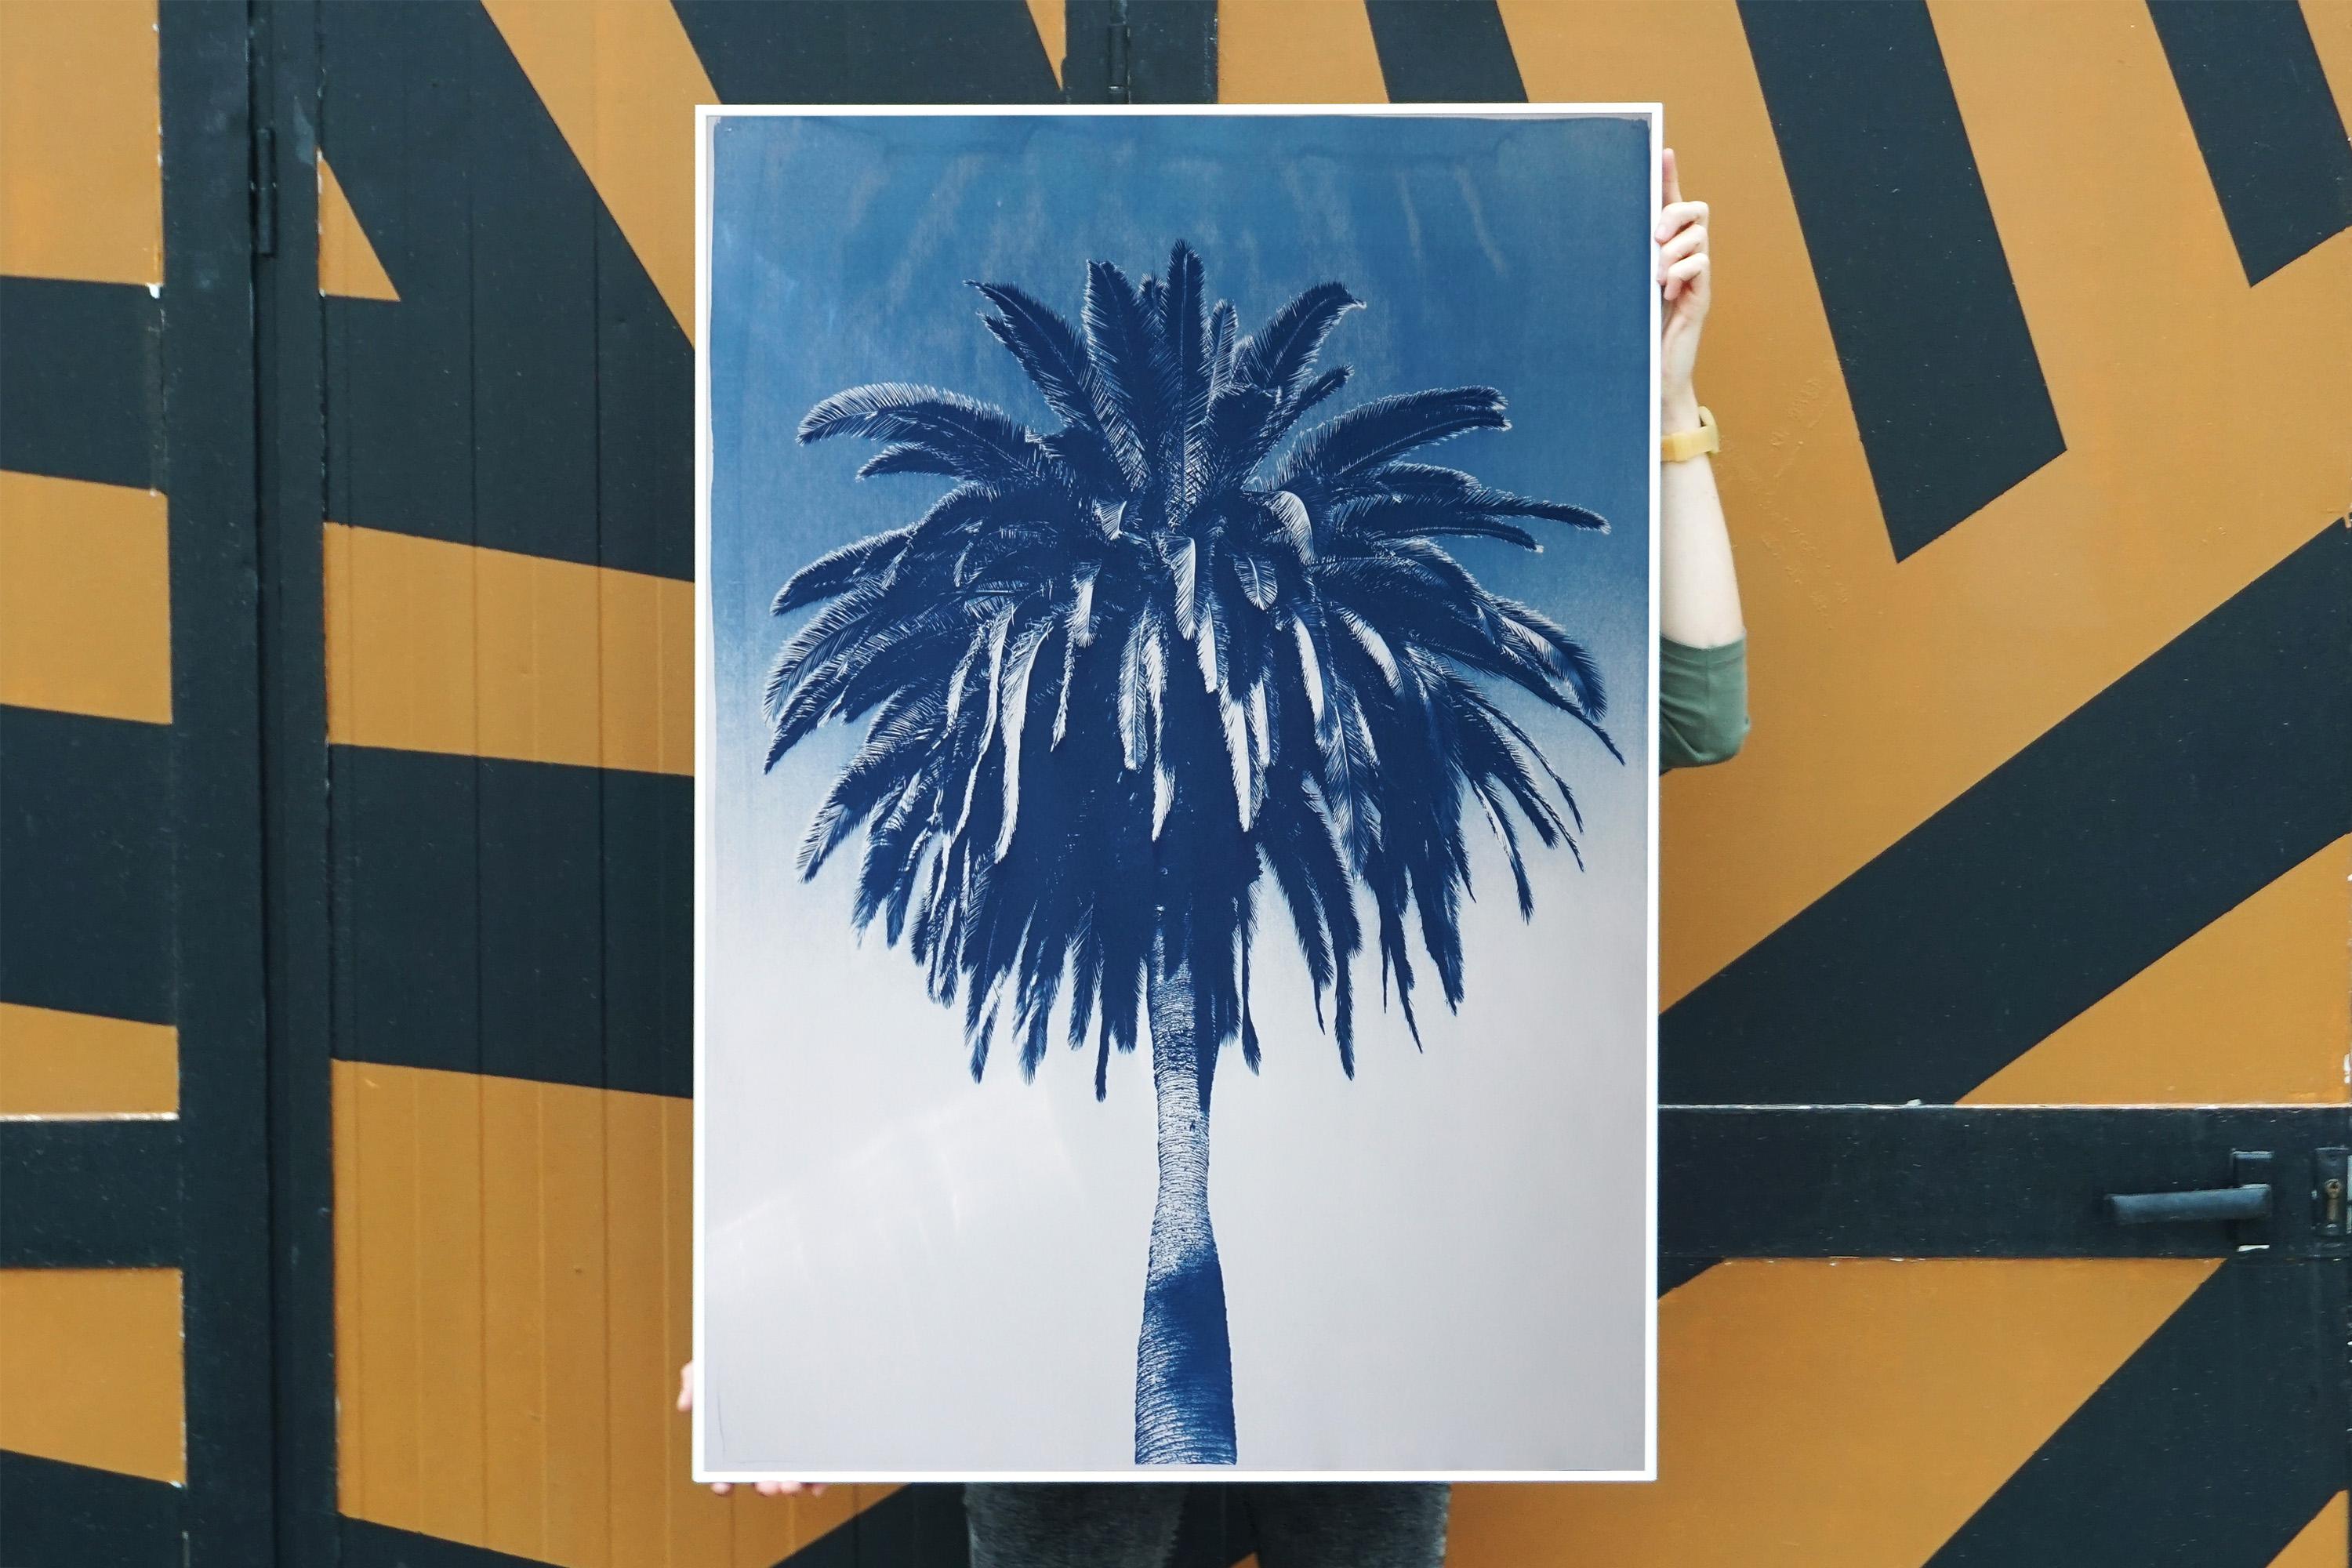 This is an exclusive handprinted limited edition cyanotype.
This cyanotype shows a palm tree from the Majorelle Gardens in Marrakesh. 

Details:
+ Title: Marrakesh Majorelle Palm
+ Year: 2019
+ Edition Size: 50
+ Stamped and Certificate of